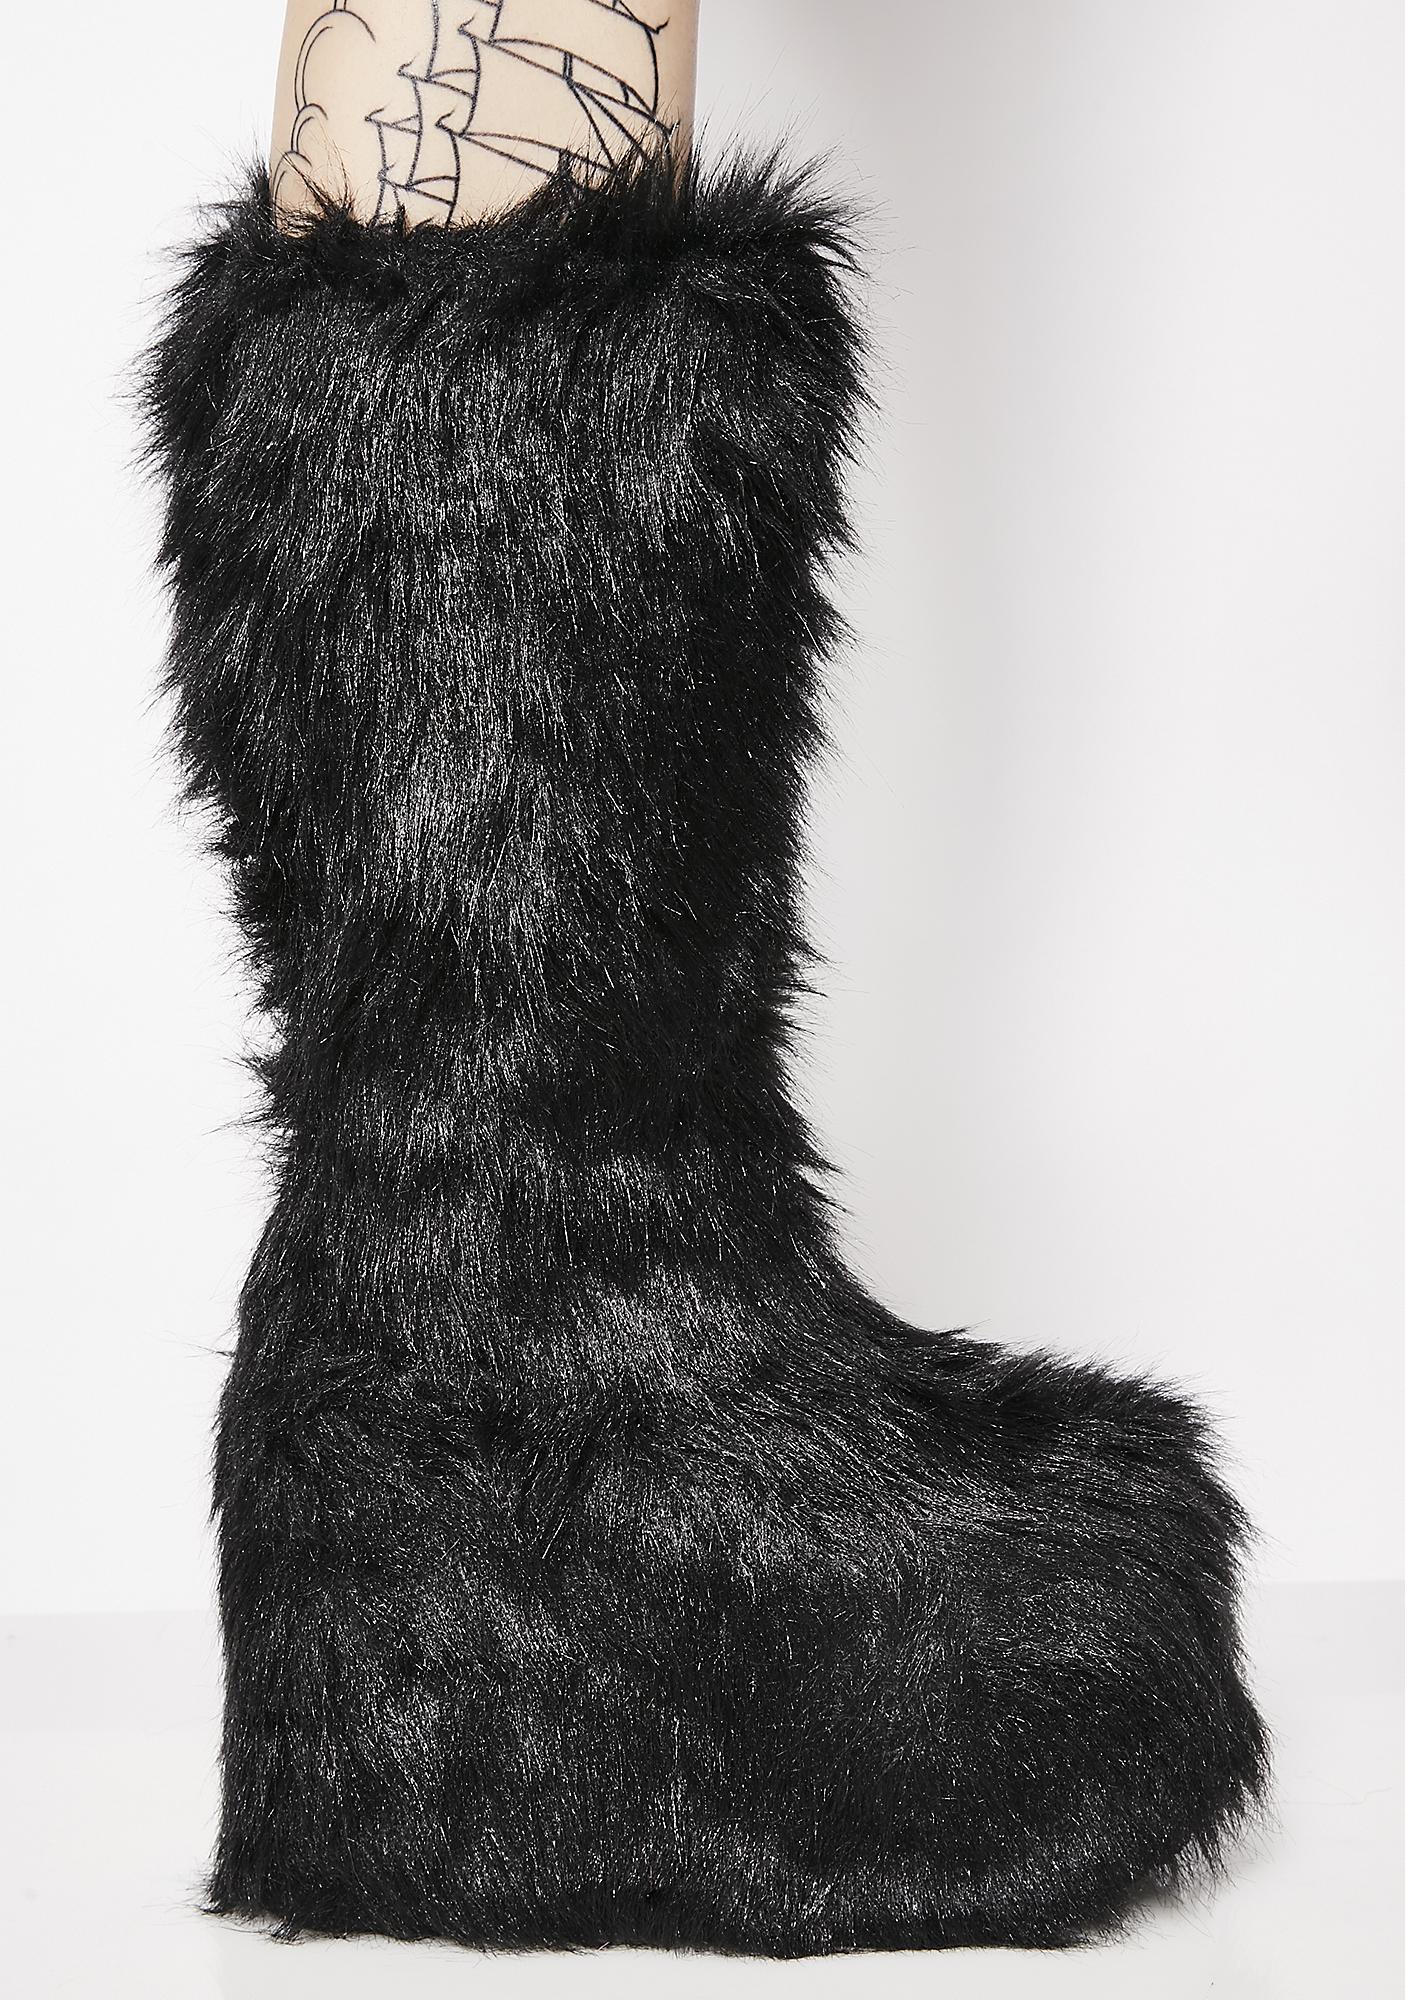 Party Monster Fuzzy Platform Boots 